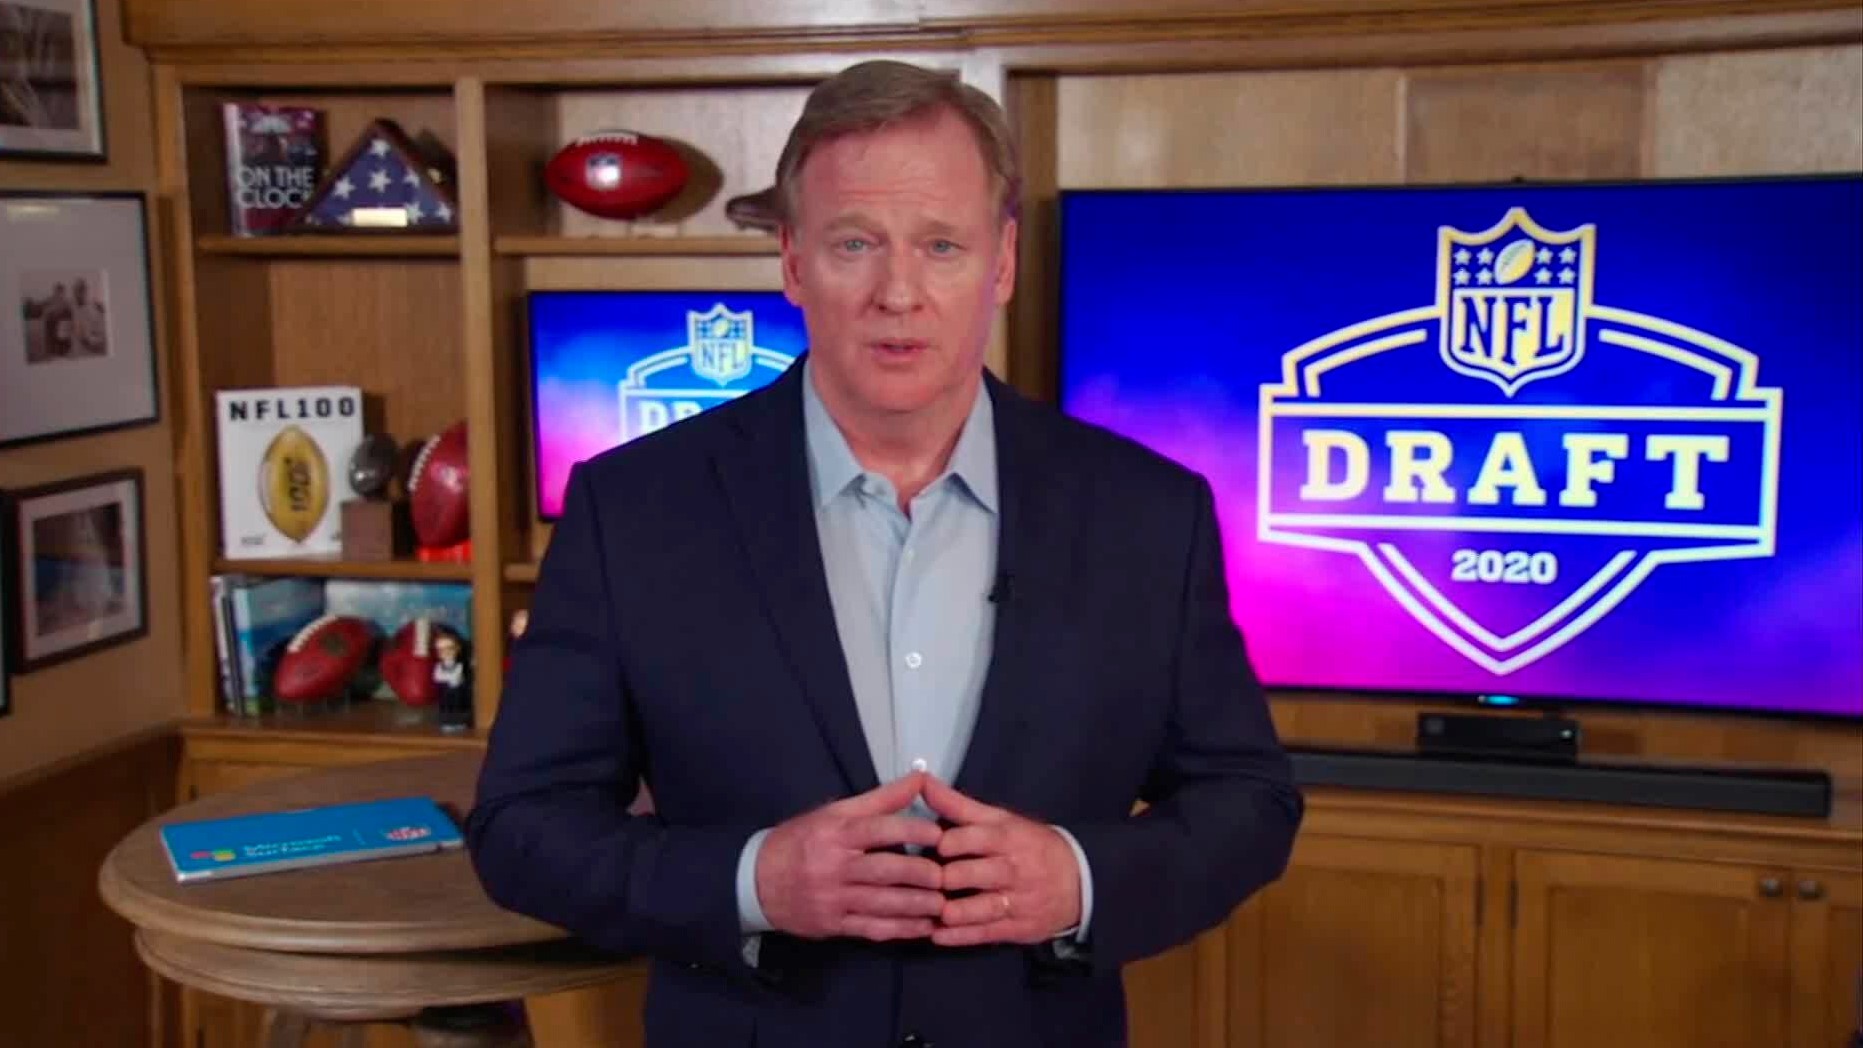 2020 NFL Draft live stream how to watch online from anywhere in the